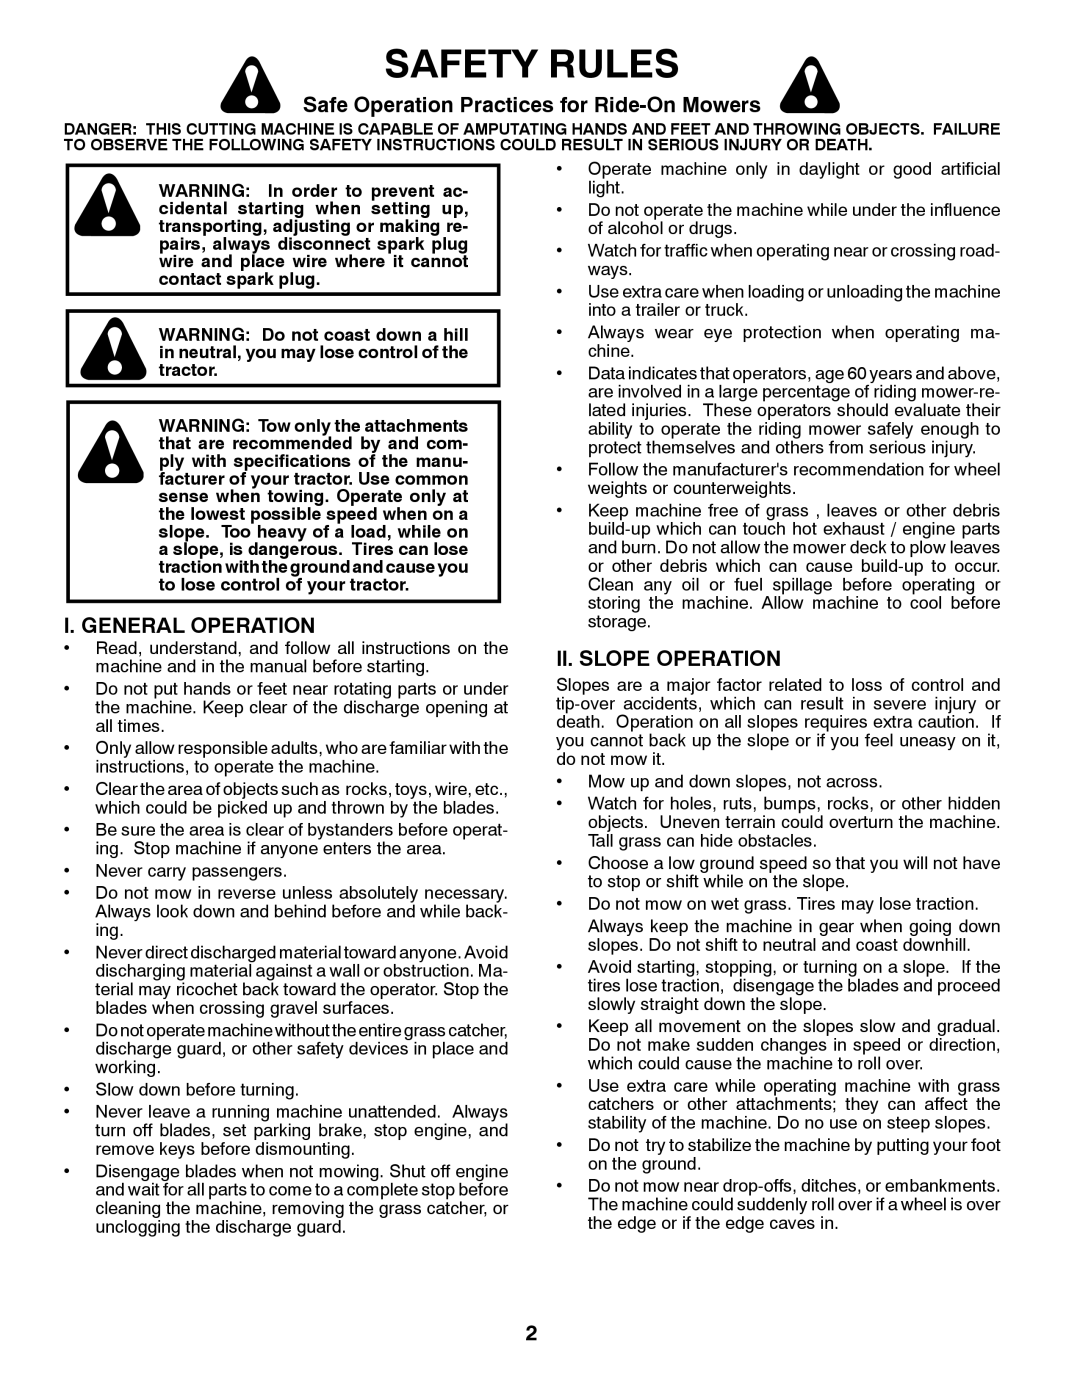 Poulan PP21H42 manual Safety Rules, Safe Operation Practices for Ride-On Mowers, General Operation, II. Slope Operation 